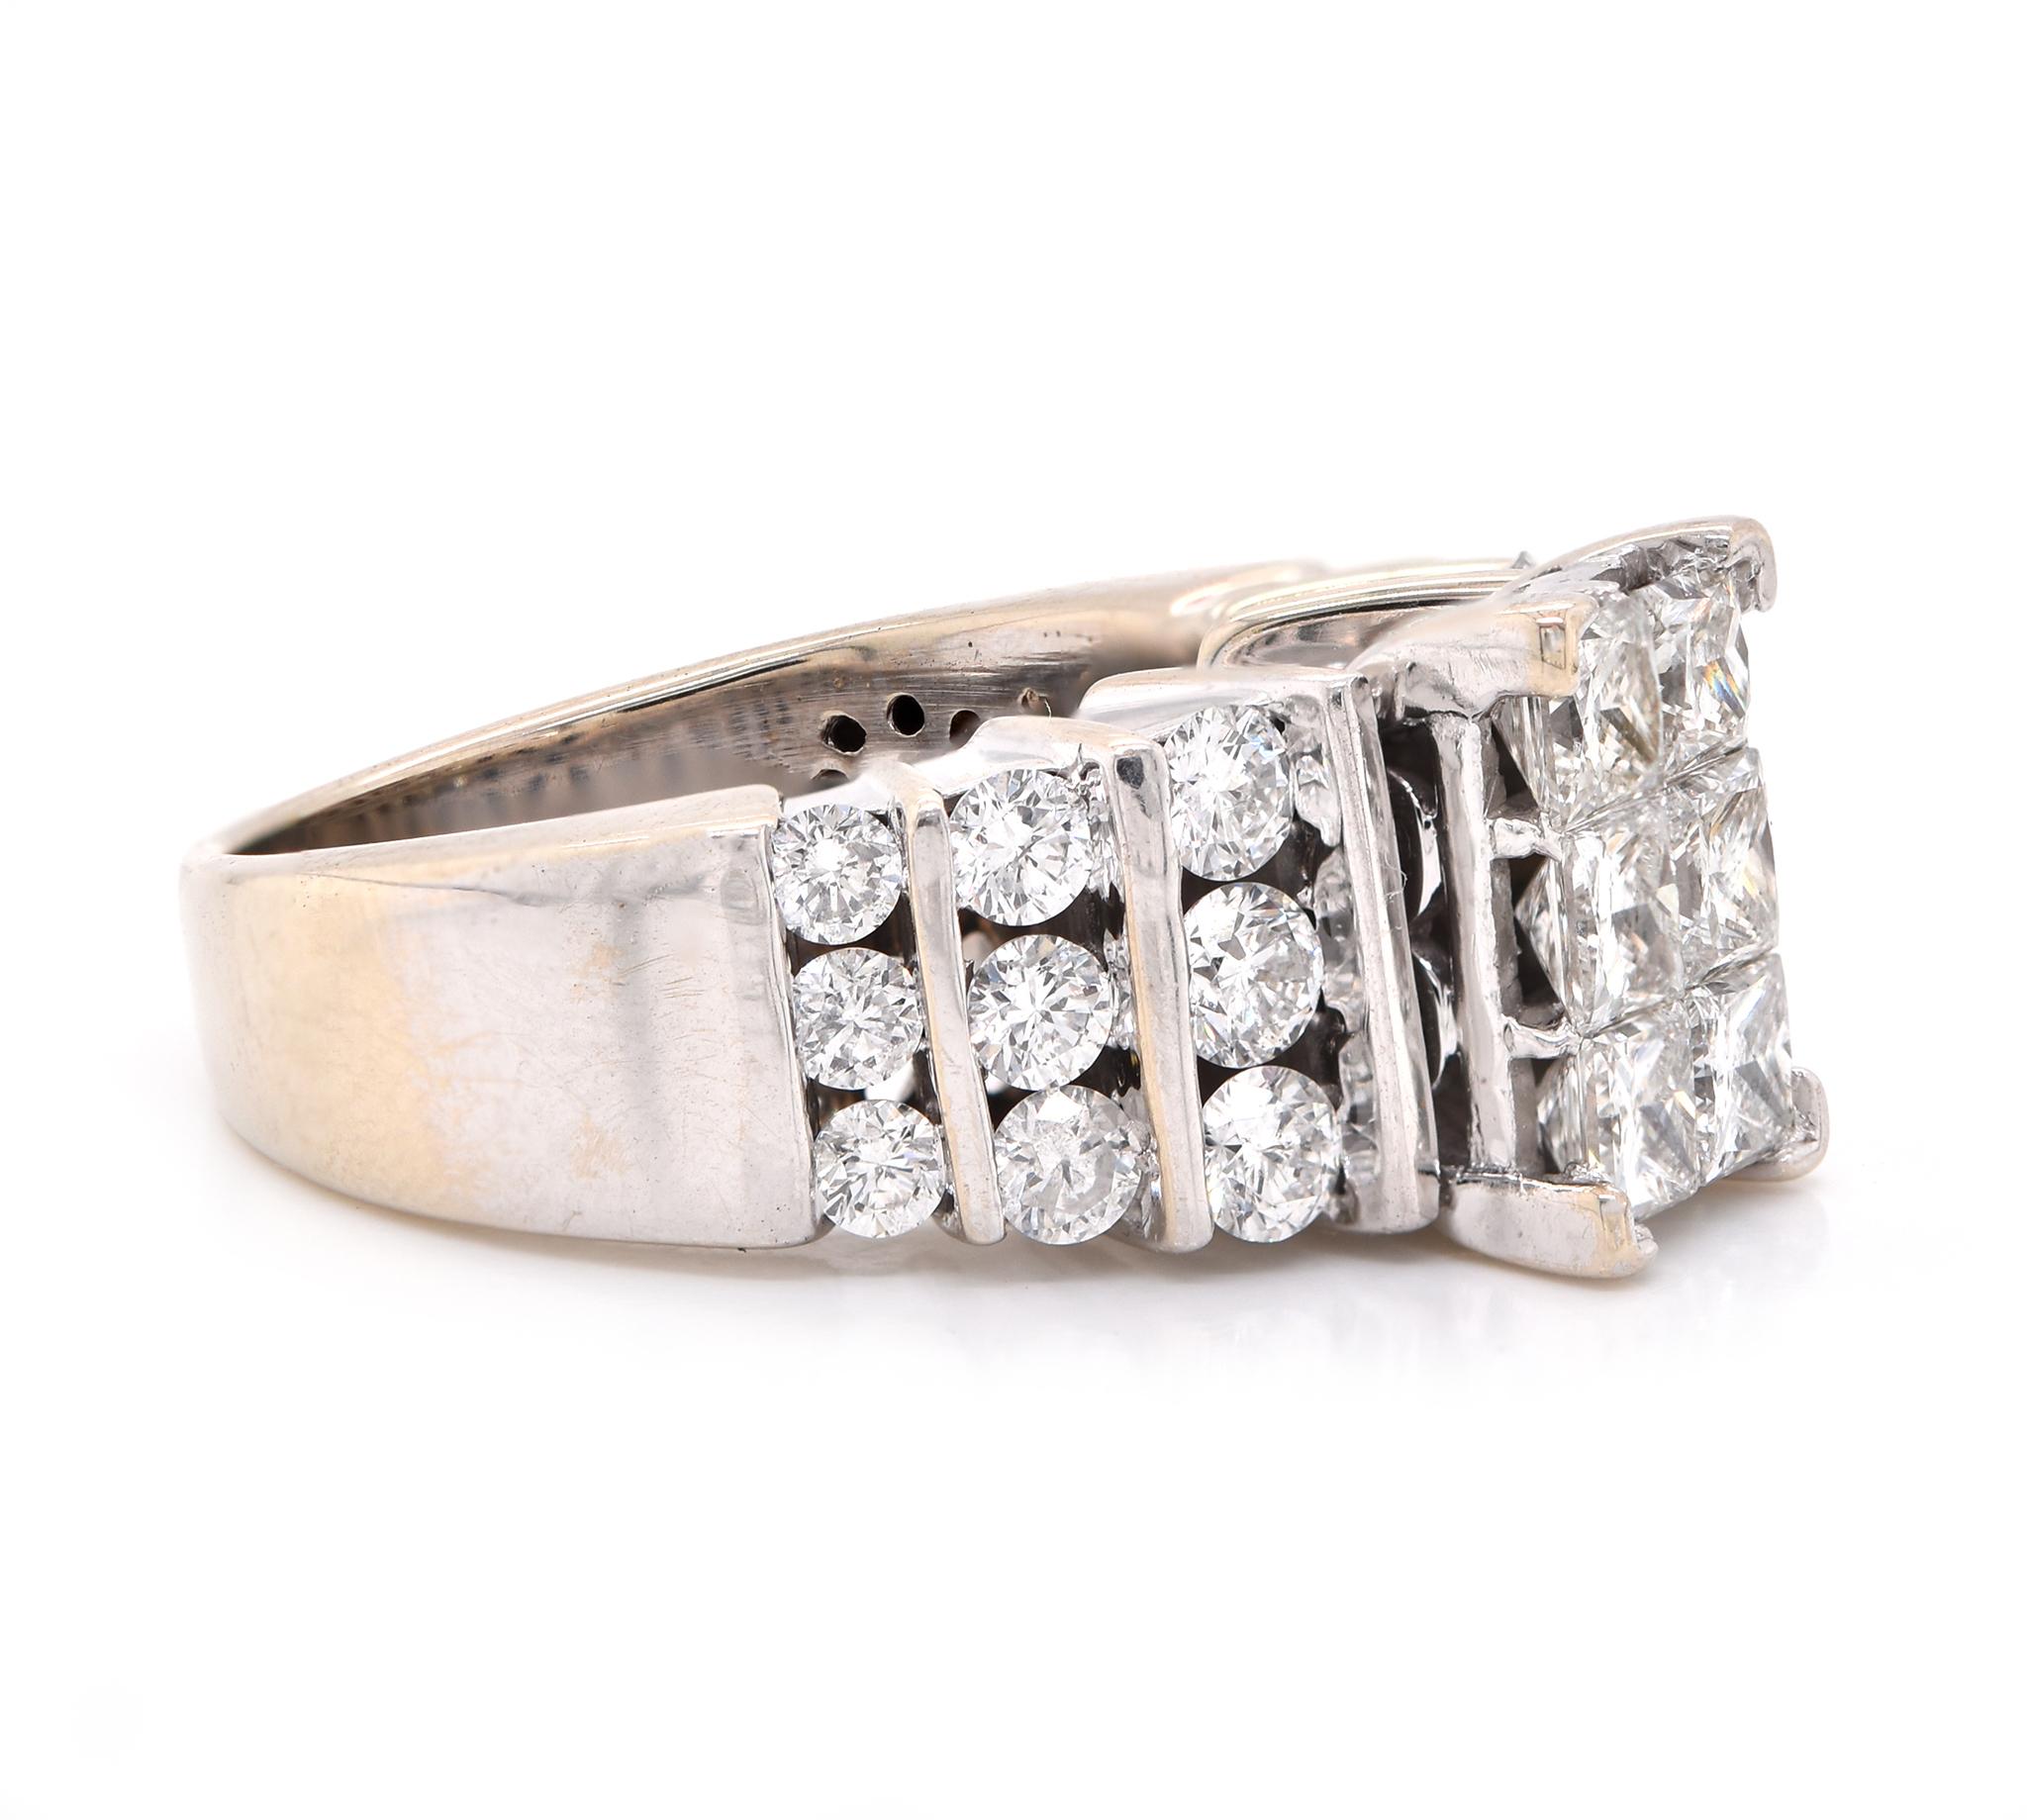 Designer: custom
Material: 14K white gold
Diamonds: 6 princess cut = 1.50cttw
Color: I
Clarity: SI1
Diamonds: 18 round brilliant cut = .72cttw
Color: H
Clarity: SI1
Ring Size: 7.25 (please allow up to 2 additional business days for sizing